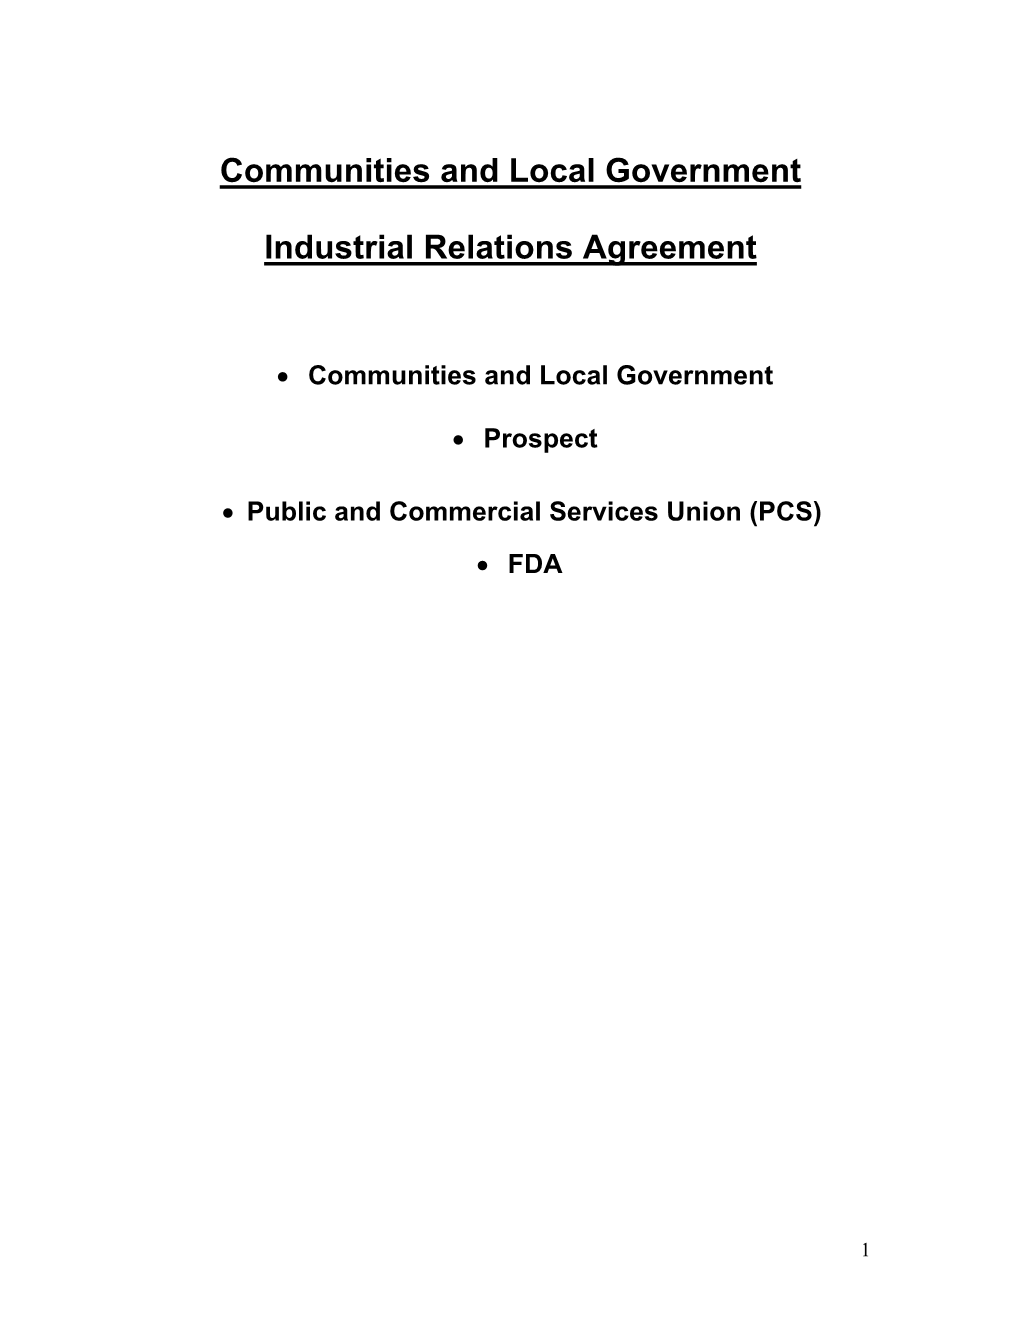 Communities and Local Government Industrial Relations Agreement